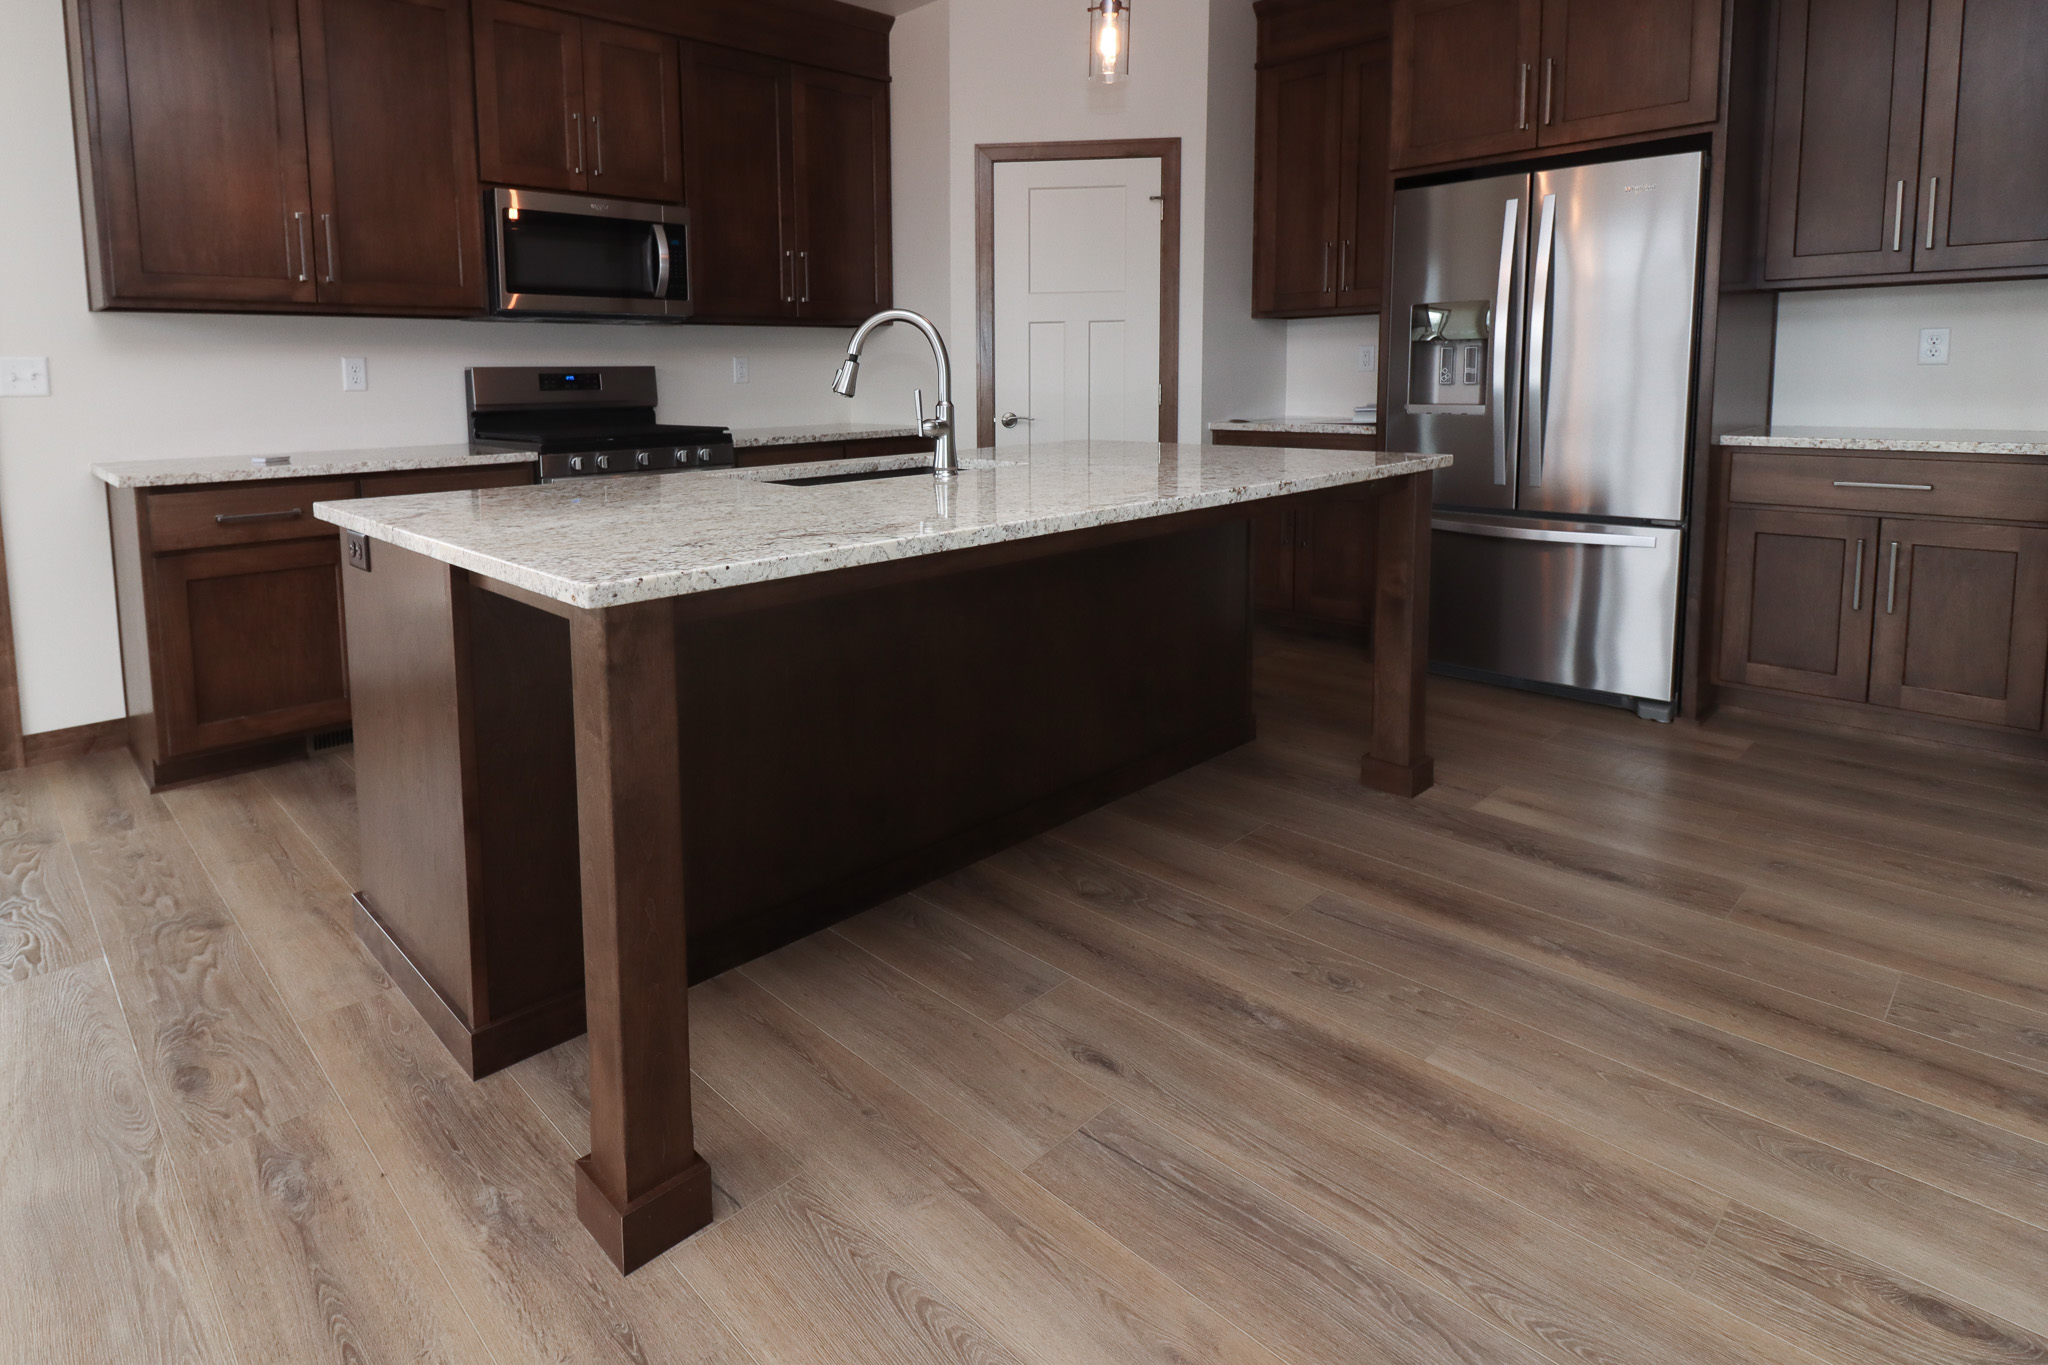 How To Pick The Perfect Luxury Vinyl, Can You Install Cabinets Over Vinyl Plank Flooring